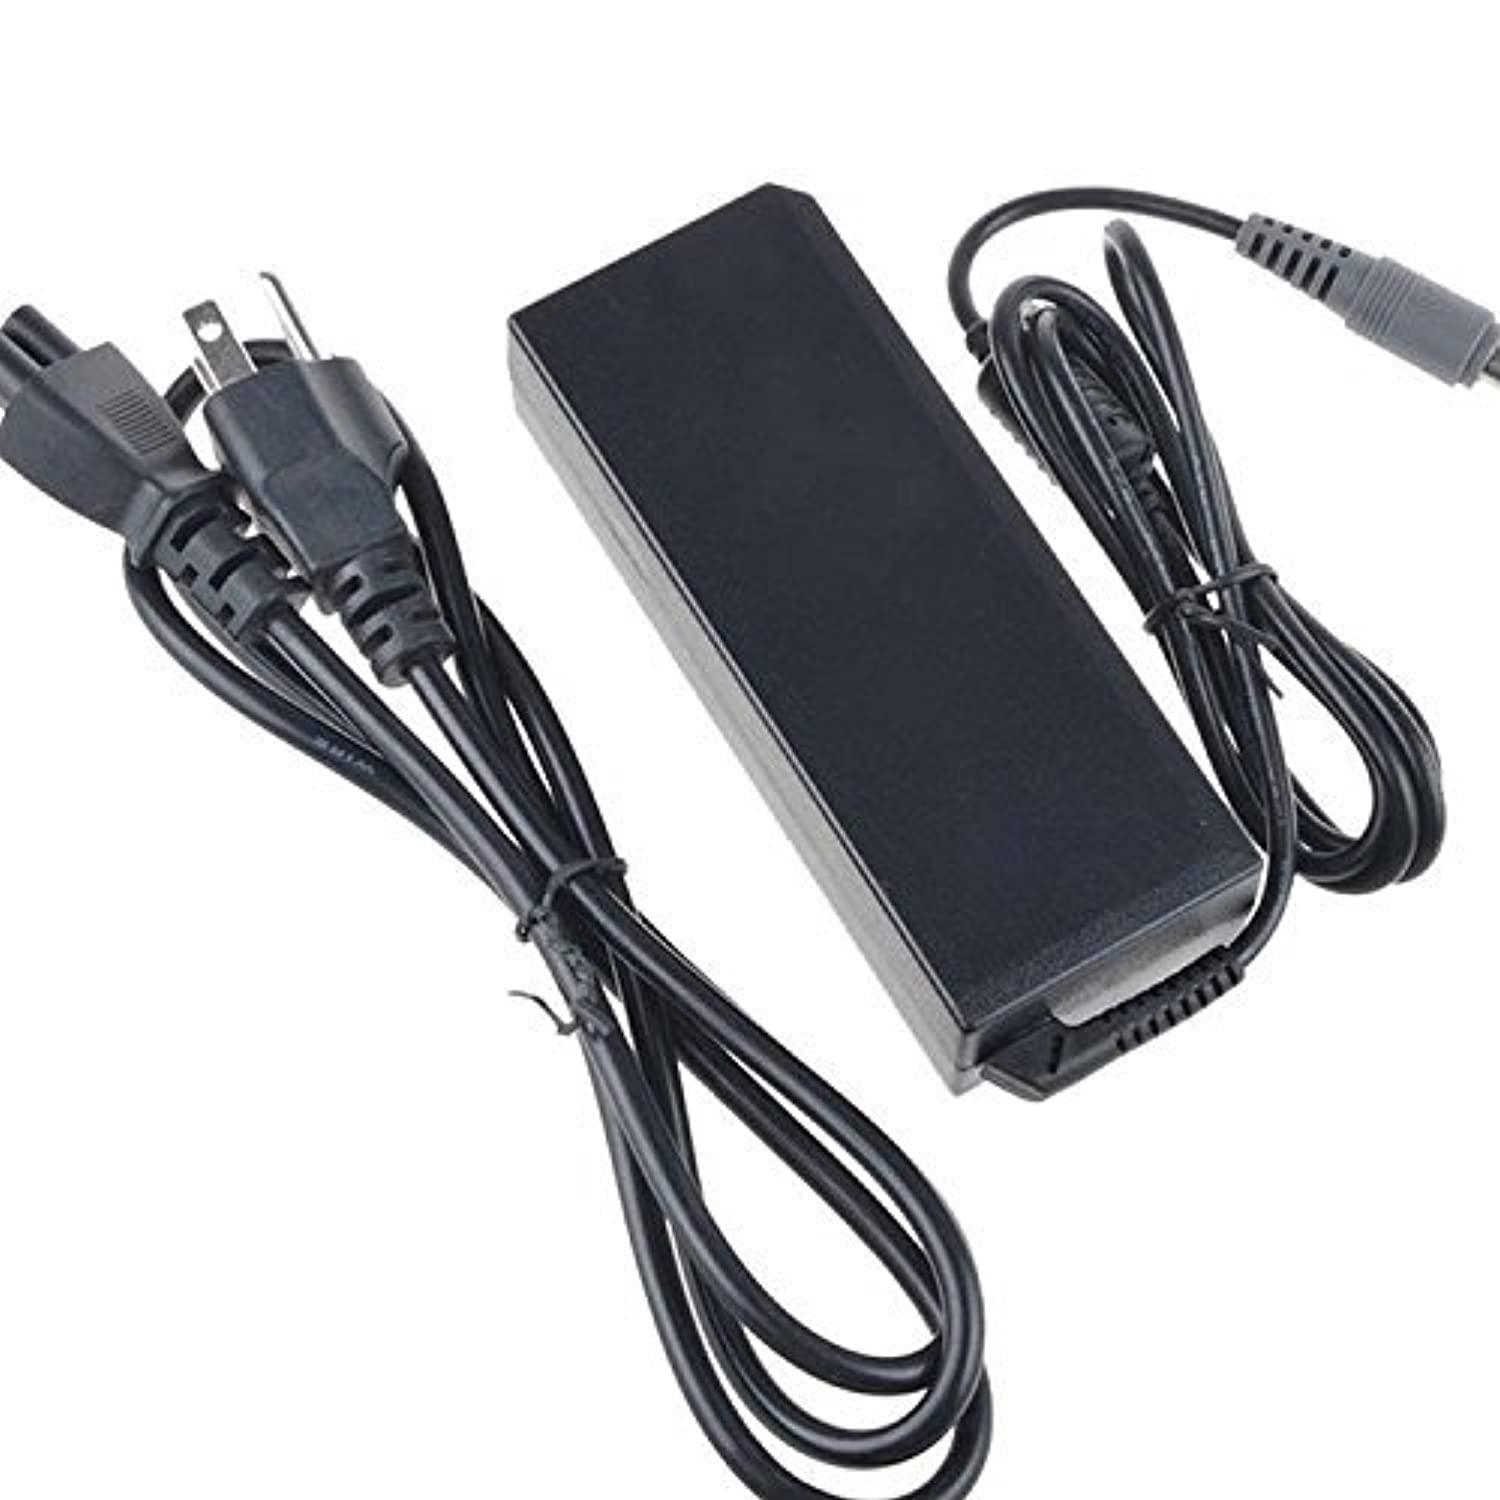 marg 24v ac/dc adapter for mitel 5010 5020 5140 5220 5240 5224 5212 ip phones dual mode voip phone 5550 ip console 5410 5412 